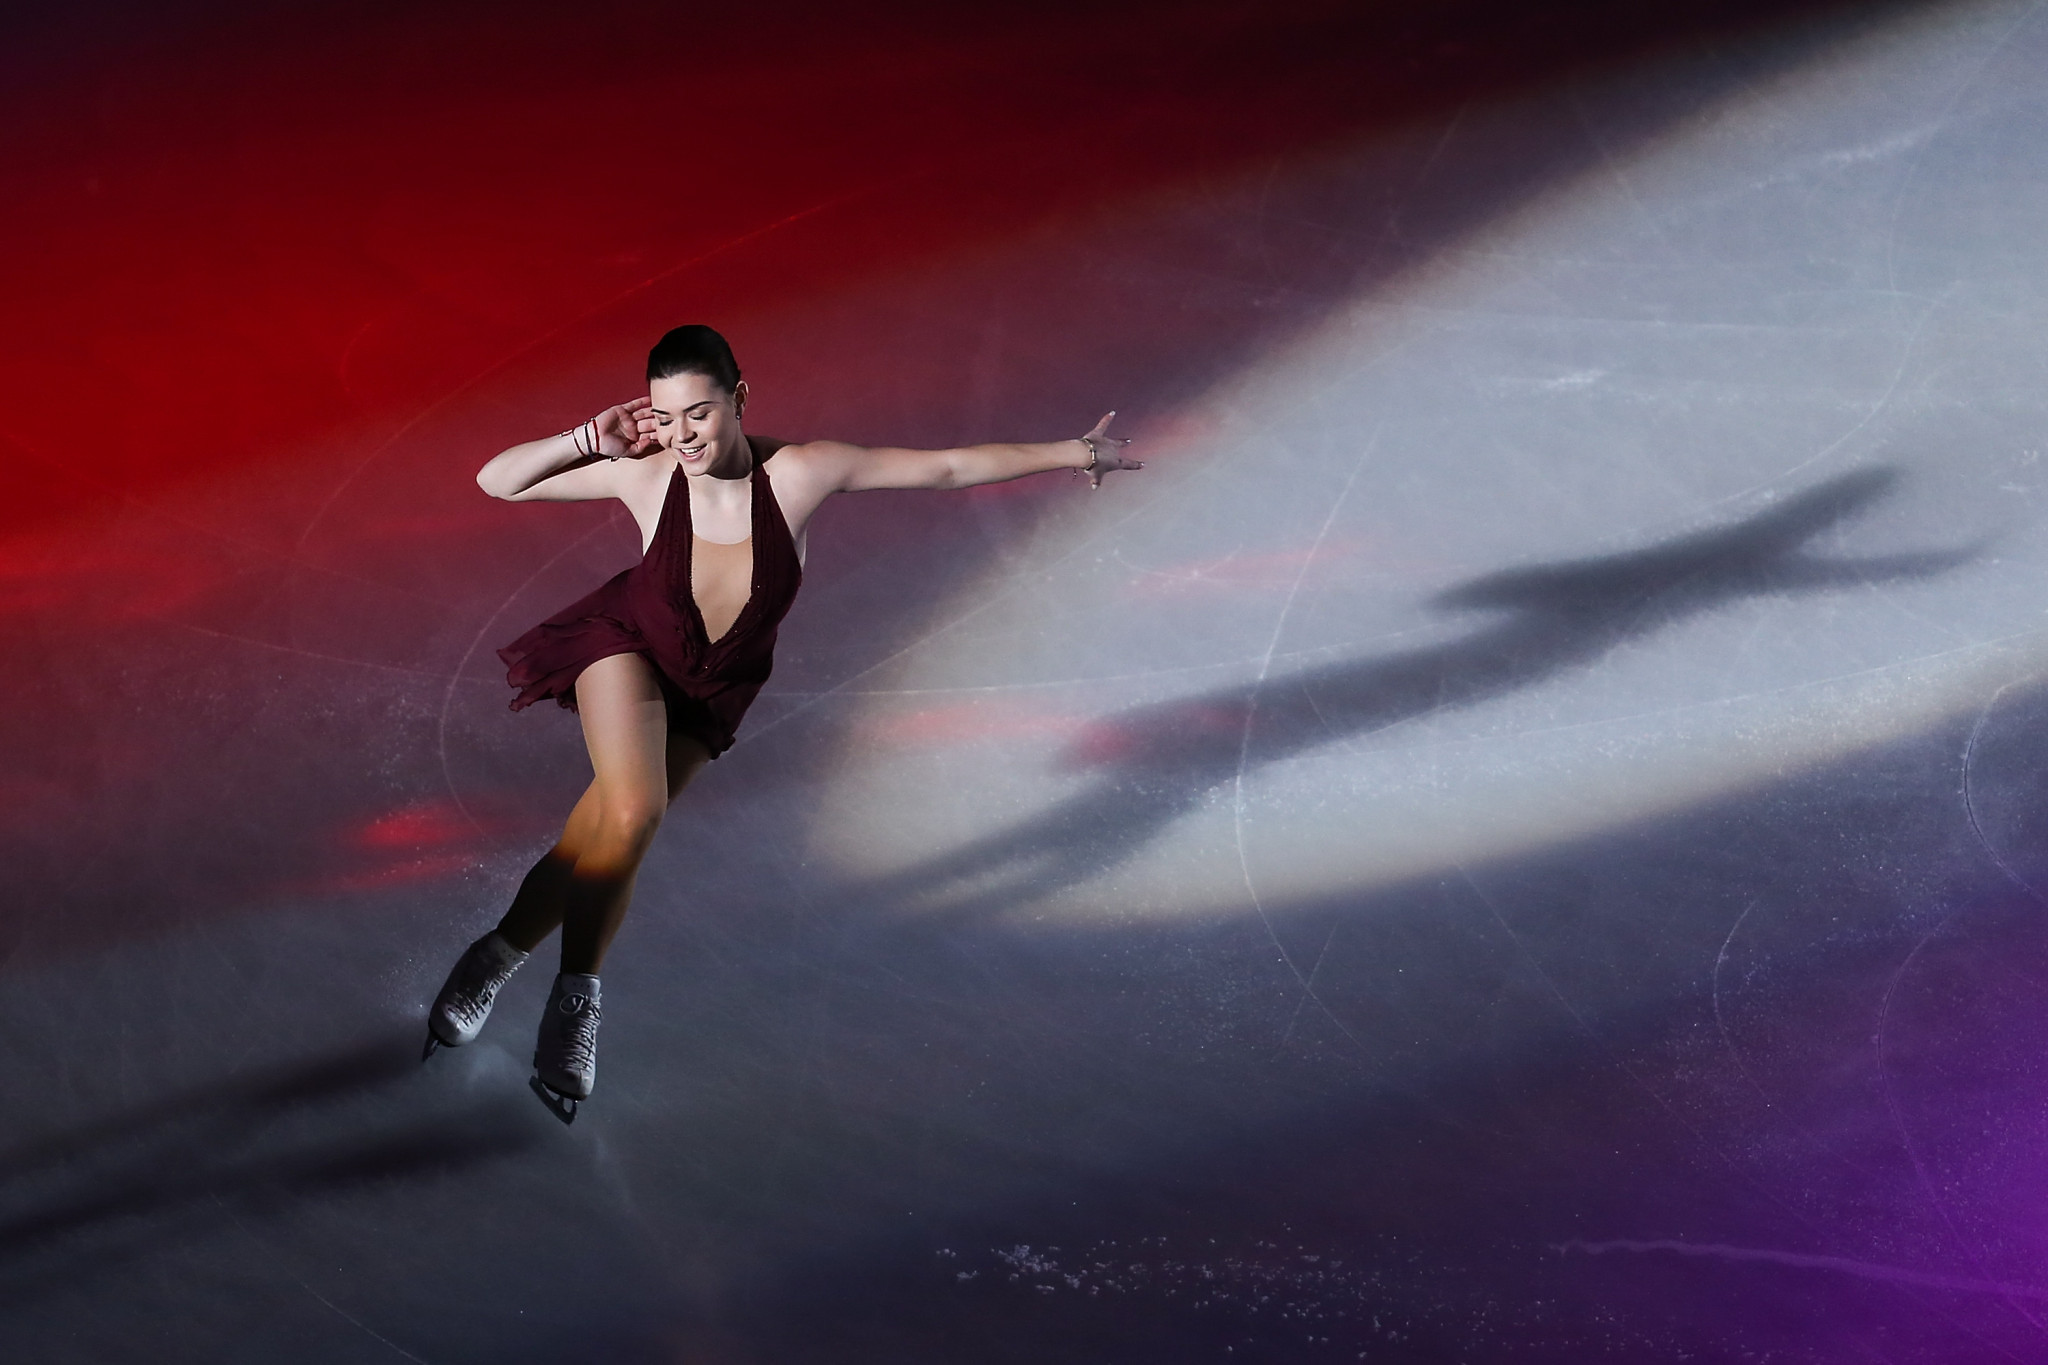 The Sochi 2014 Olympic champion is now looking to guide the next generation of figure skaters ©Getty Images